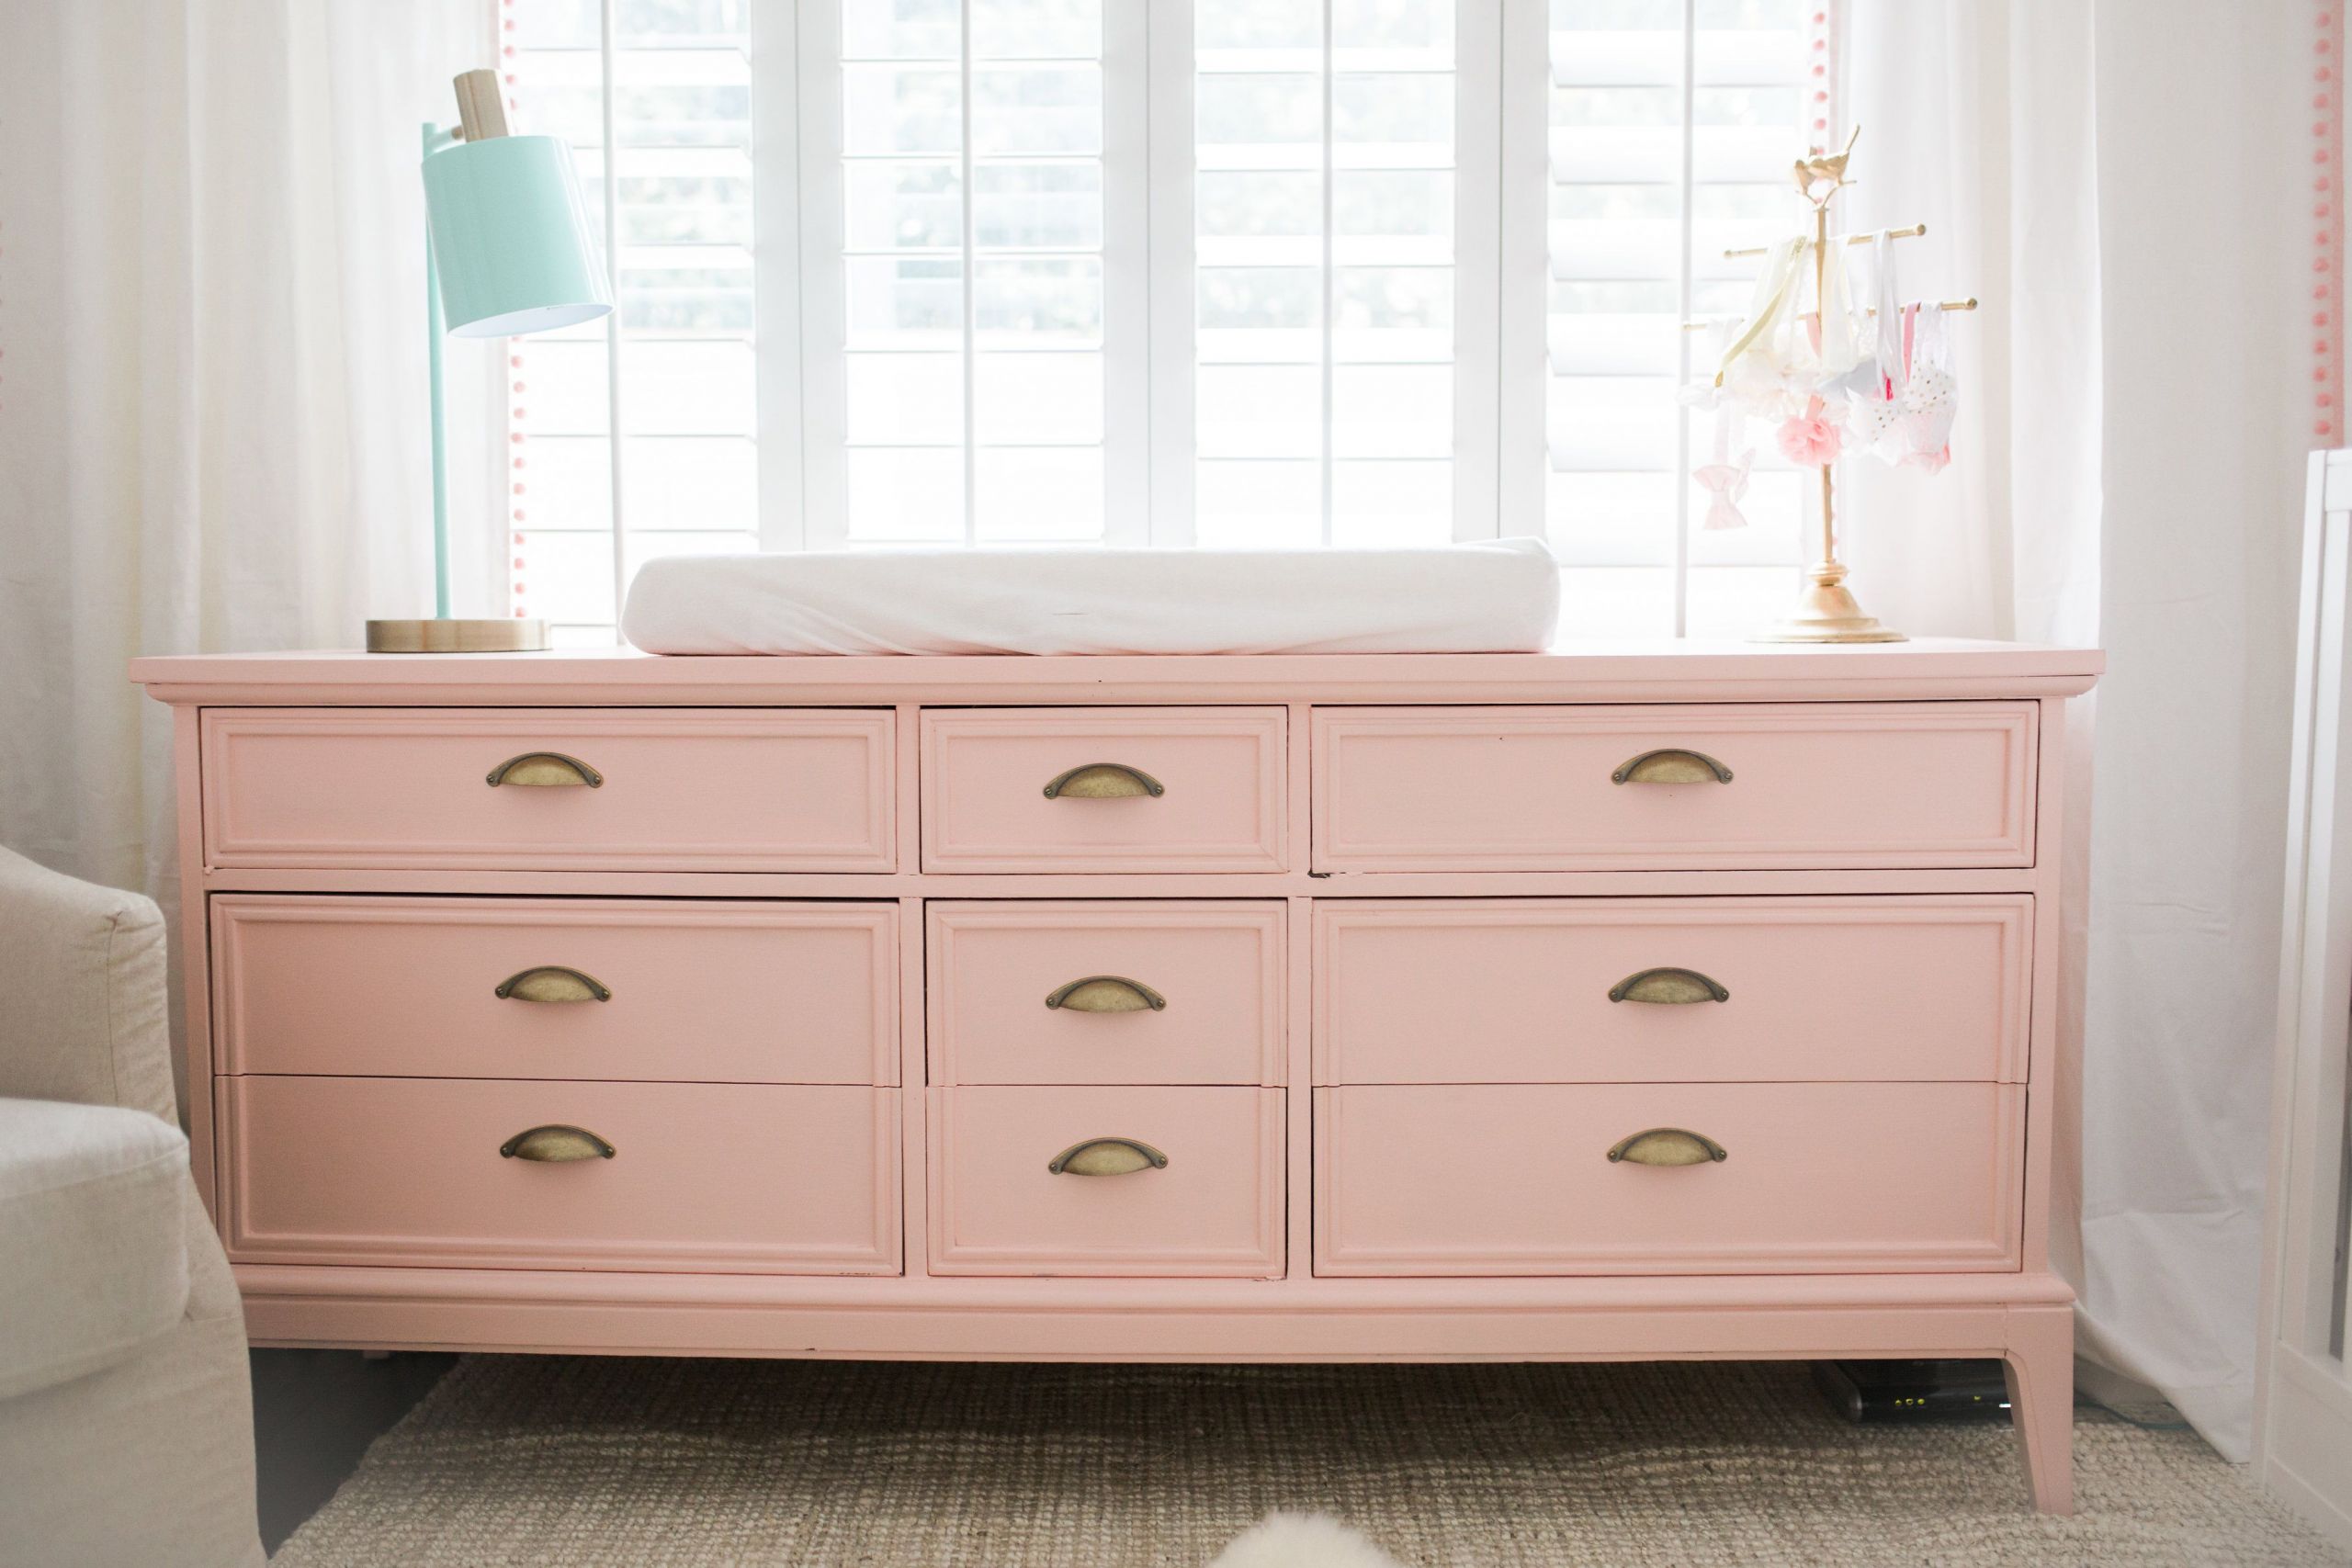 White Dressers For Baby Room
 Bright White & Pastel Baby Girl Nursery Reveal